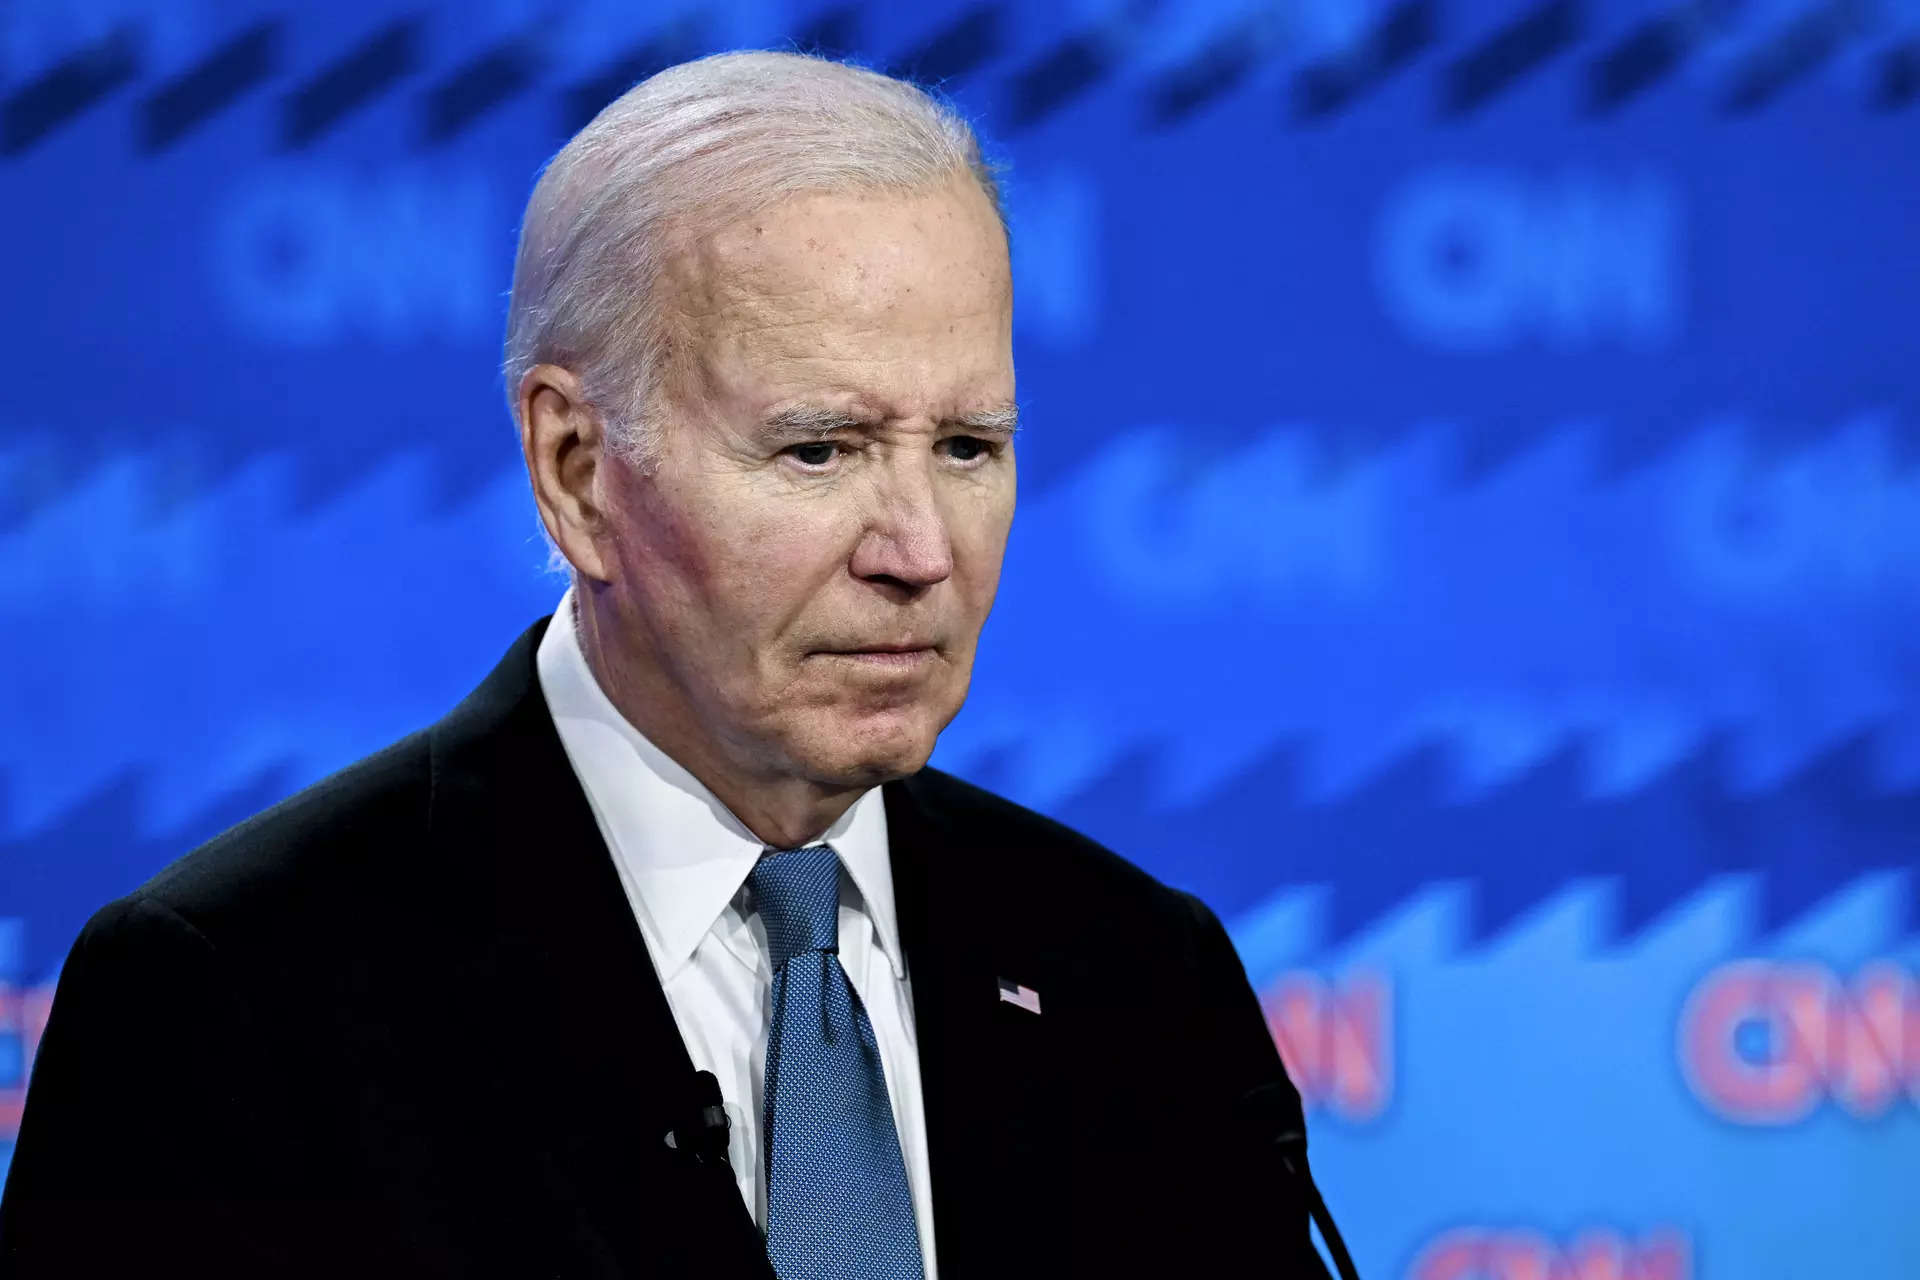 Joe Biden's lapses are said to be increasingly common and worrisome 